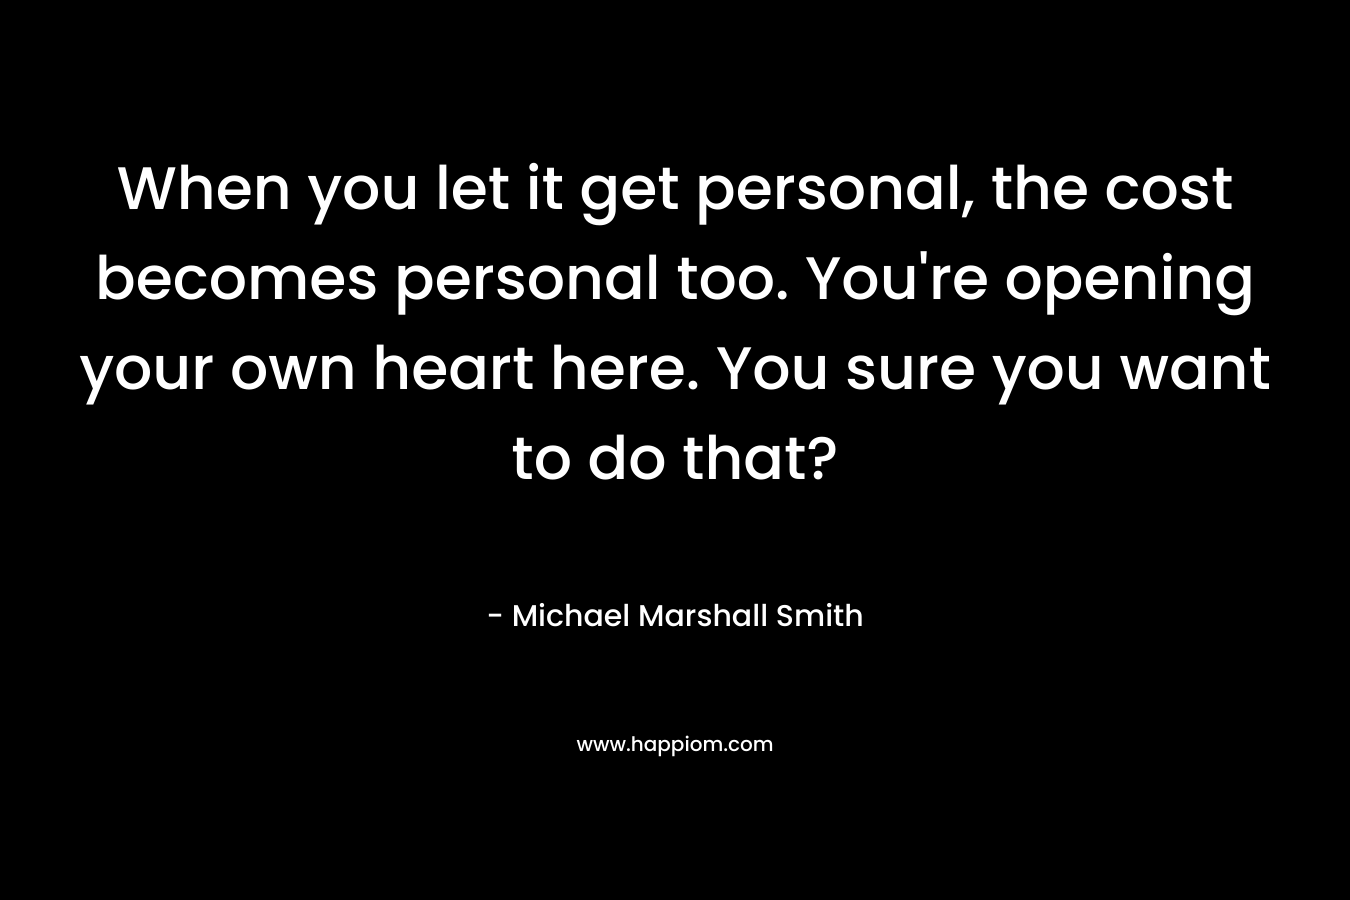 When you let it get personal, the cost becomes personal too. You’re opening your own heart here. You sure you want to do that? – Michael Marshall Smith